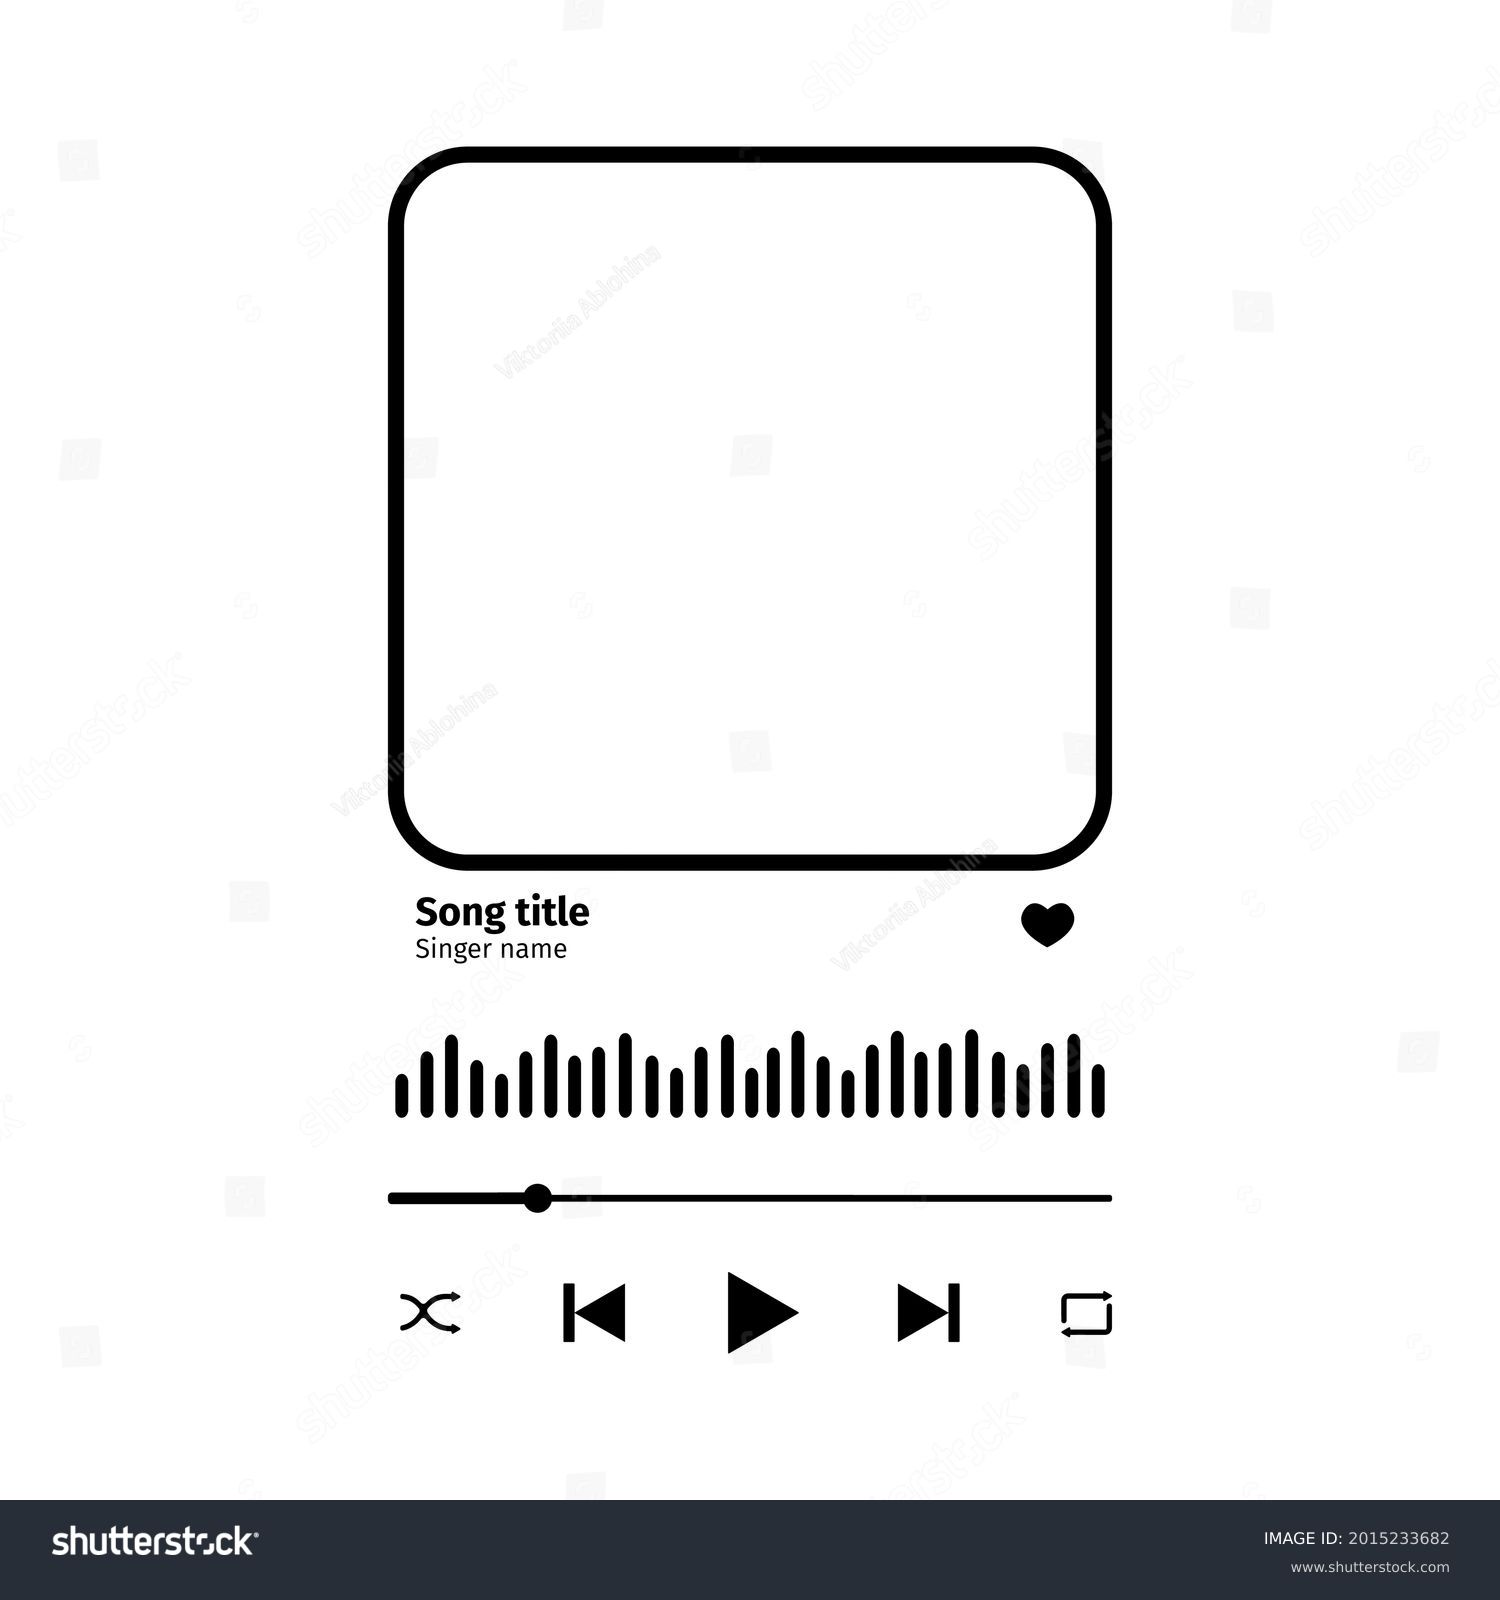 Song plaque with buttons, loading bar, equalizer sign and frame for album photo. Trendy music player interface as template for romantic gift. Vector outline illustration. #2015233682